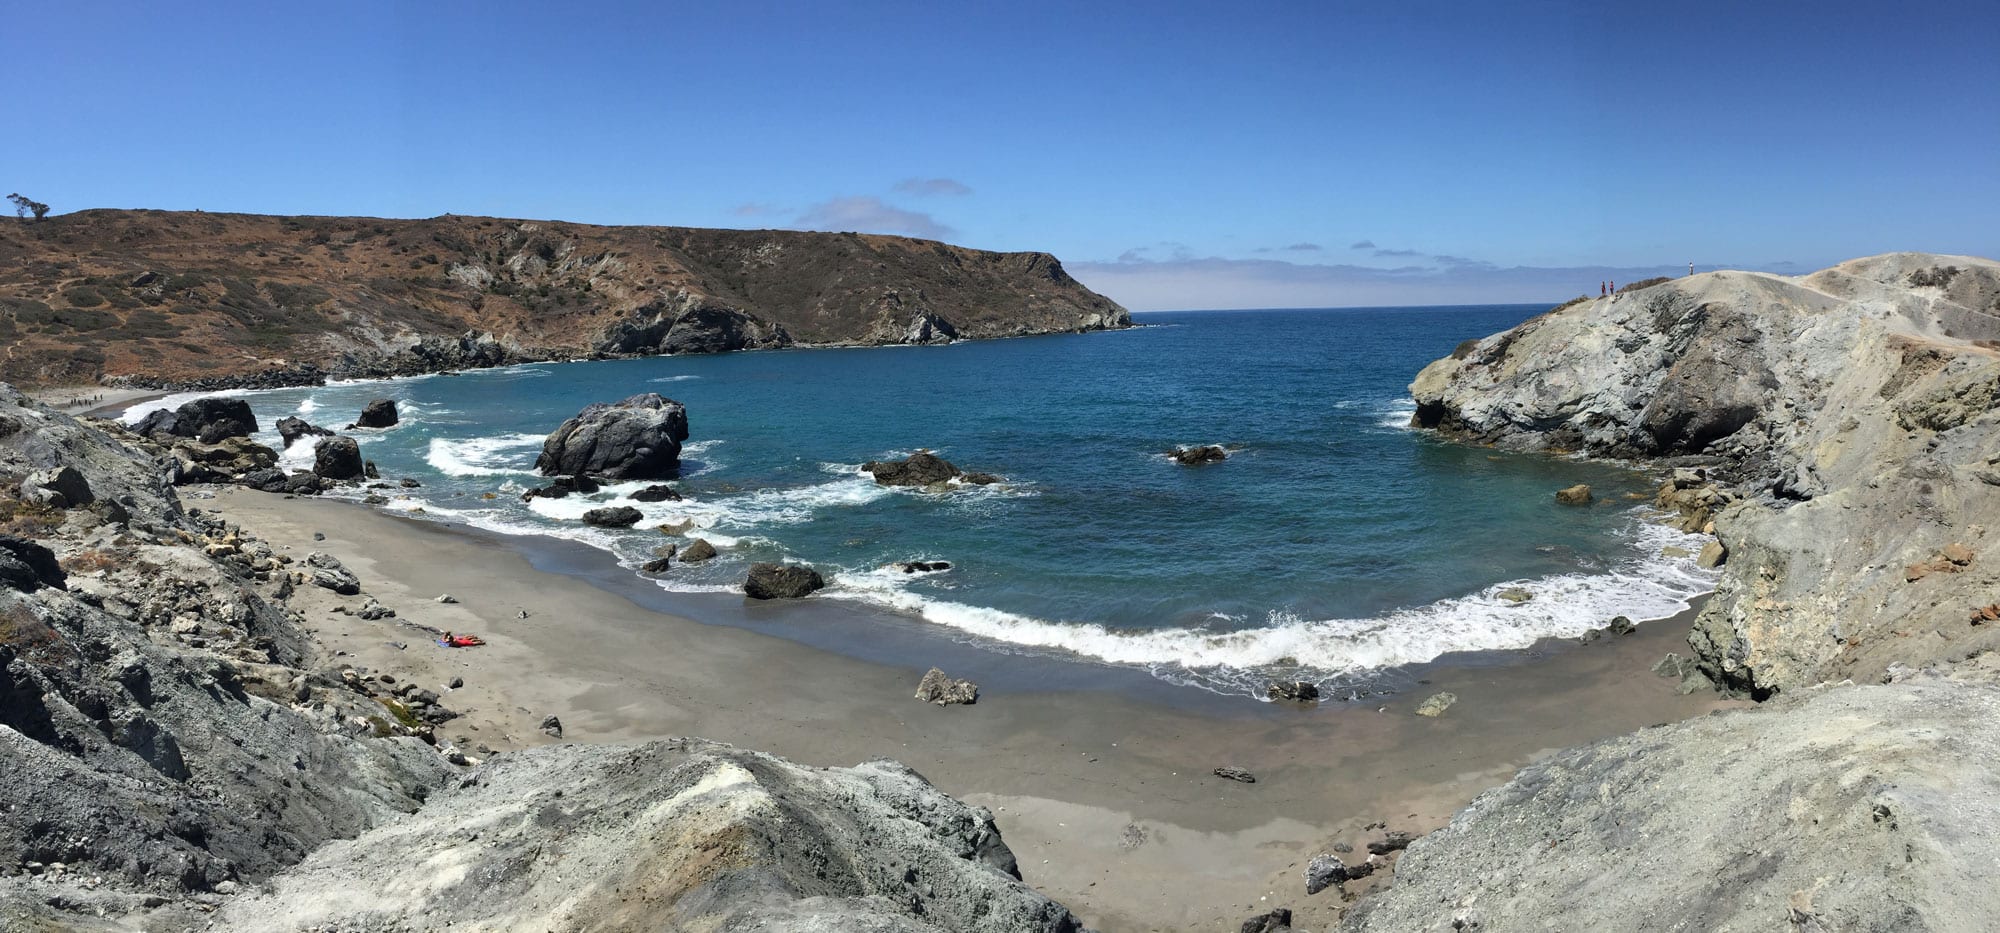 Shark Harbor on Catalina Island / Plan a backpacking trip on the Trans-Catalina Trail on Catalina Island with this trail guide with tips on the best campsites, water availability, gear & more